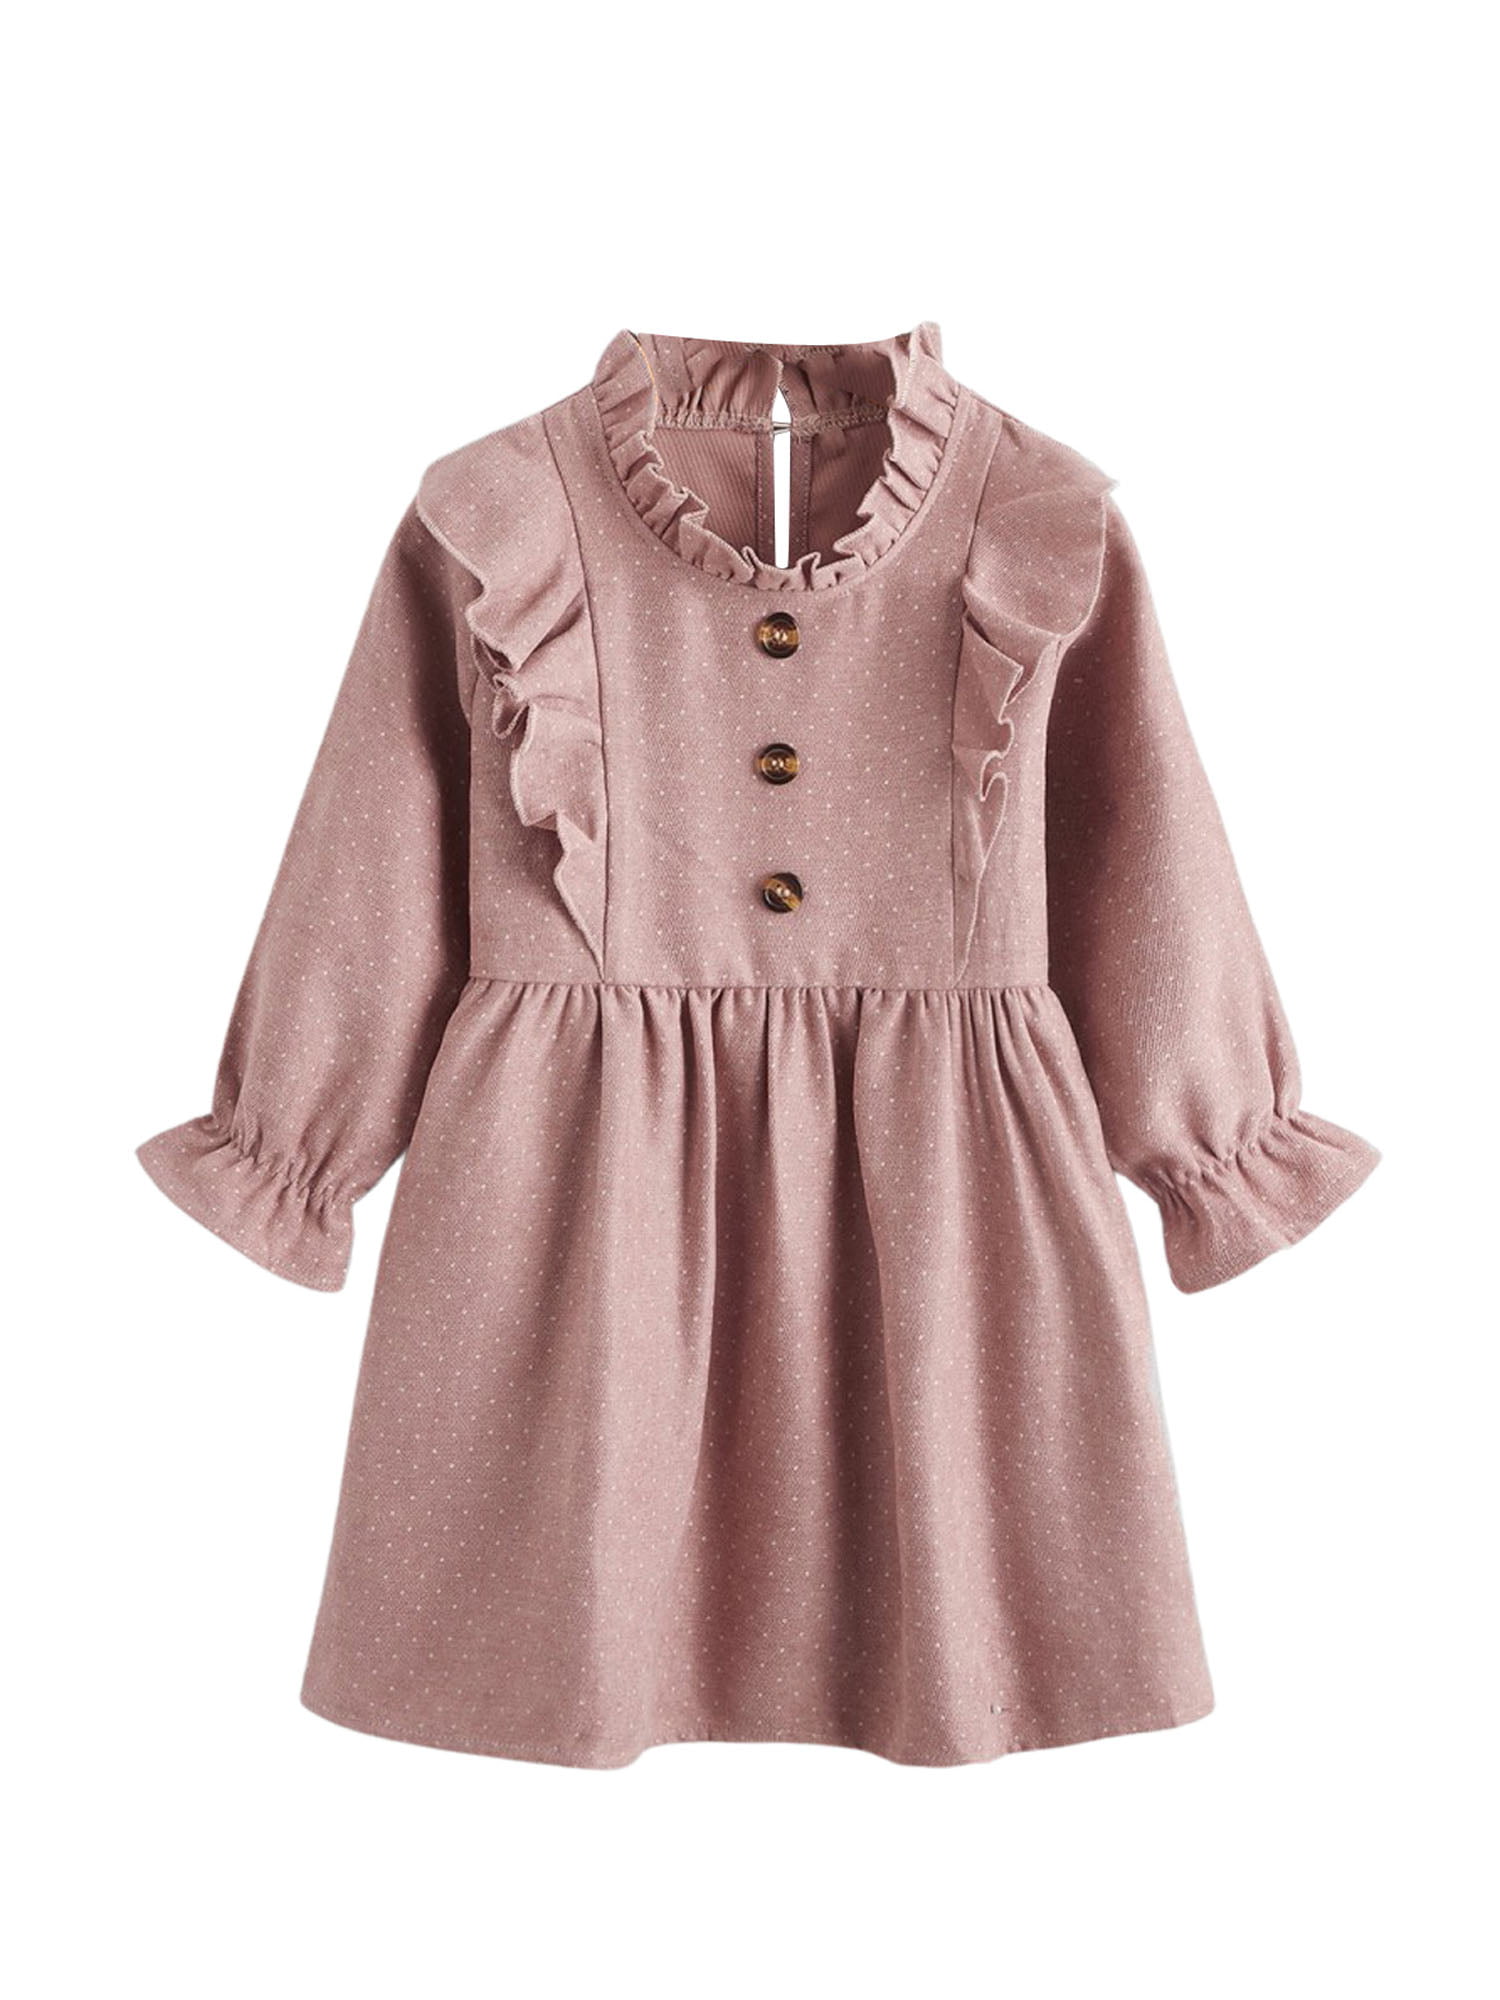 NoName casual dress KIDS FASHION Dresses Combined discount 66% Blue/White/Multicolored 4Y 